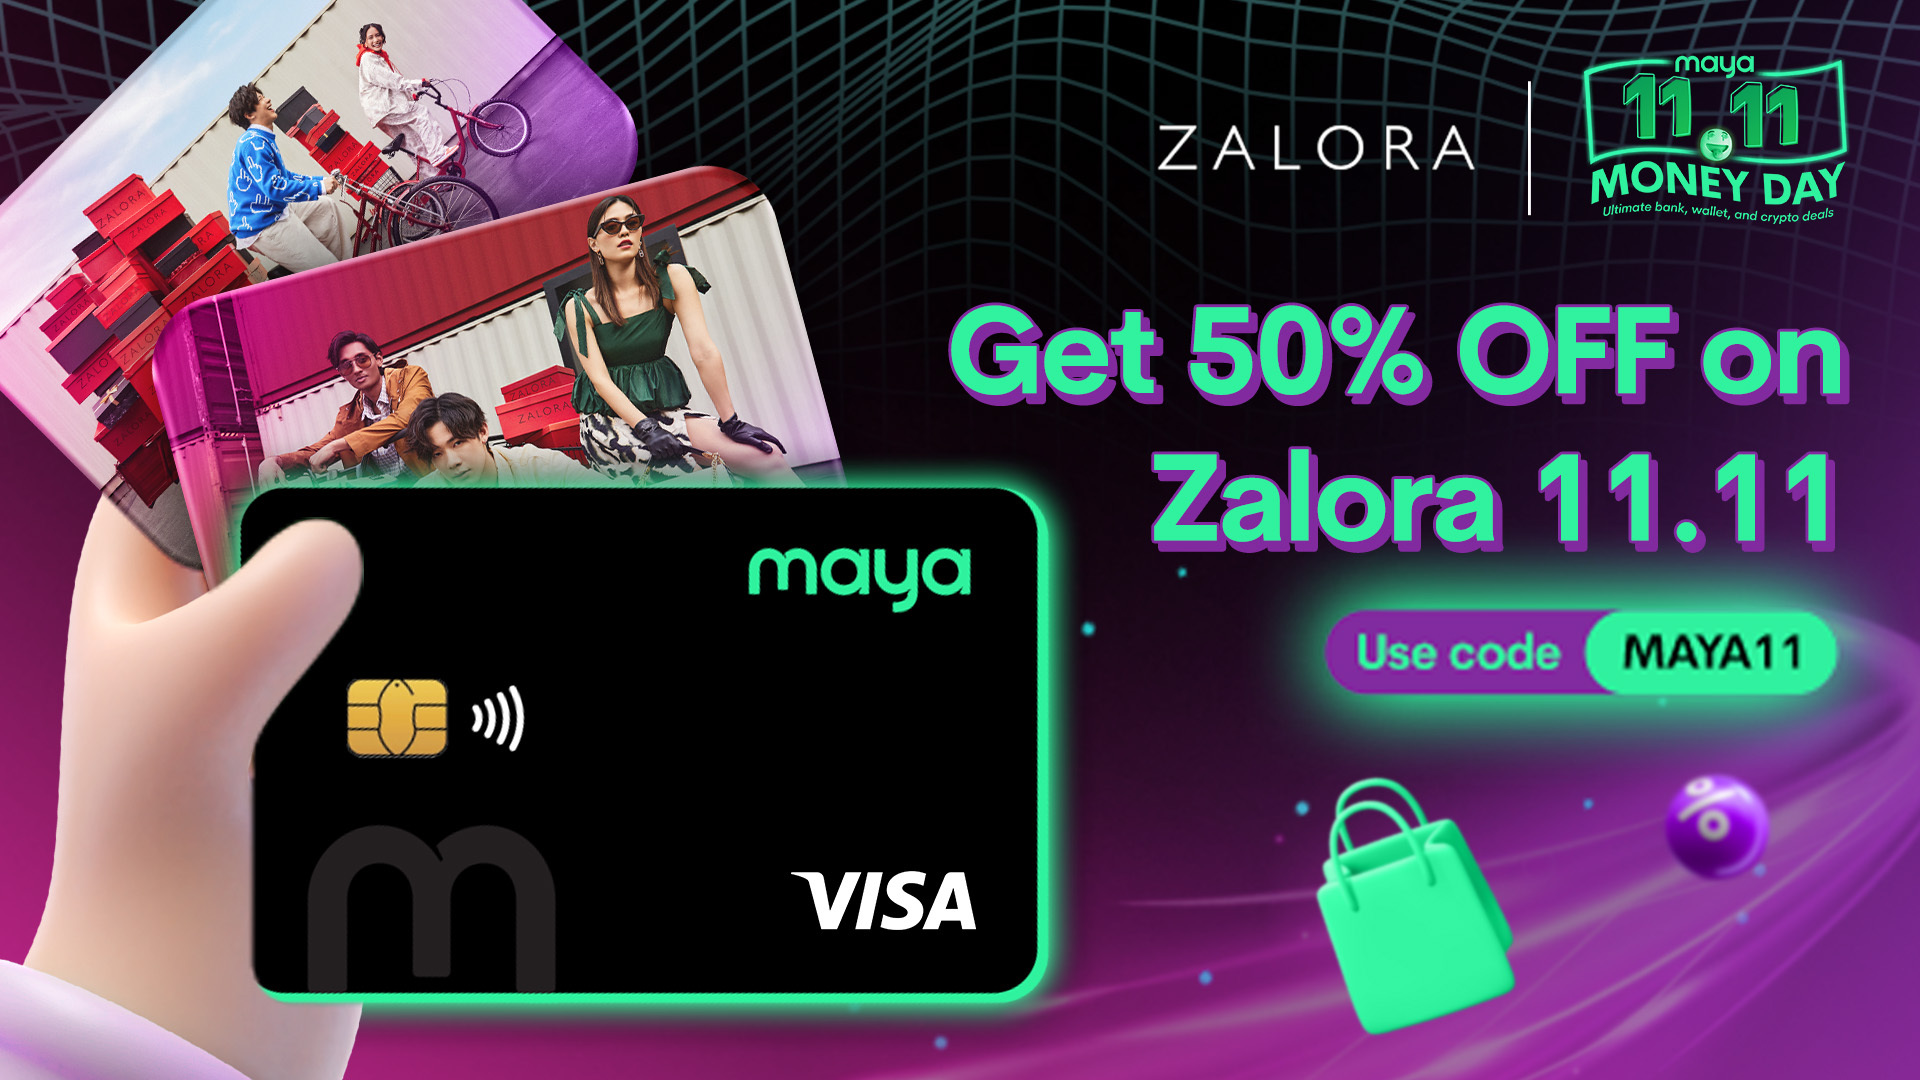 Get 50% OFF on Zalora with your Maya Card!